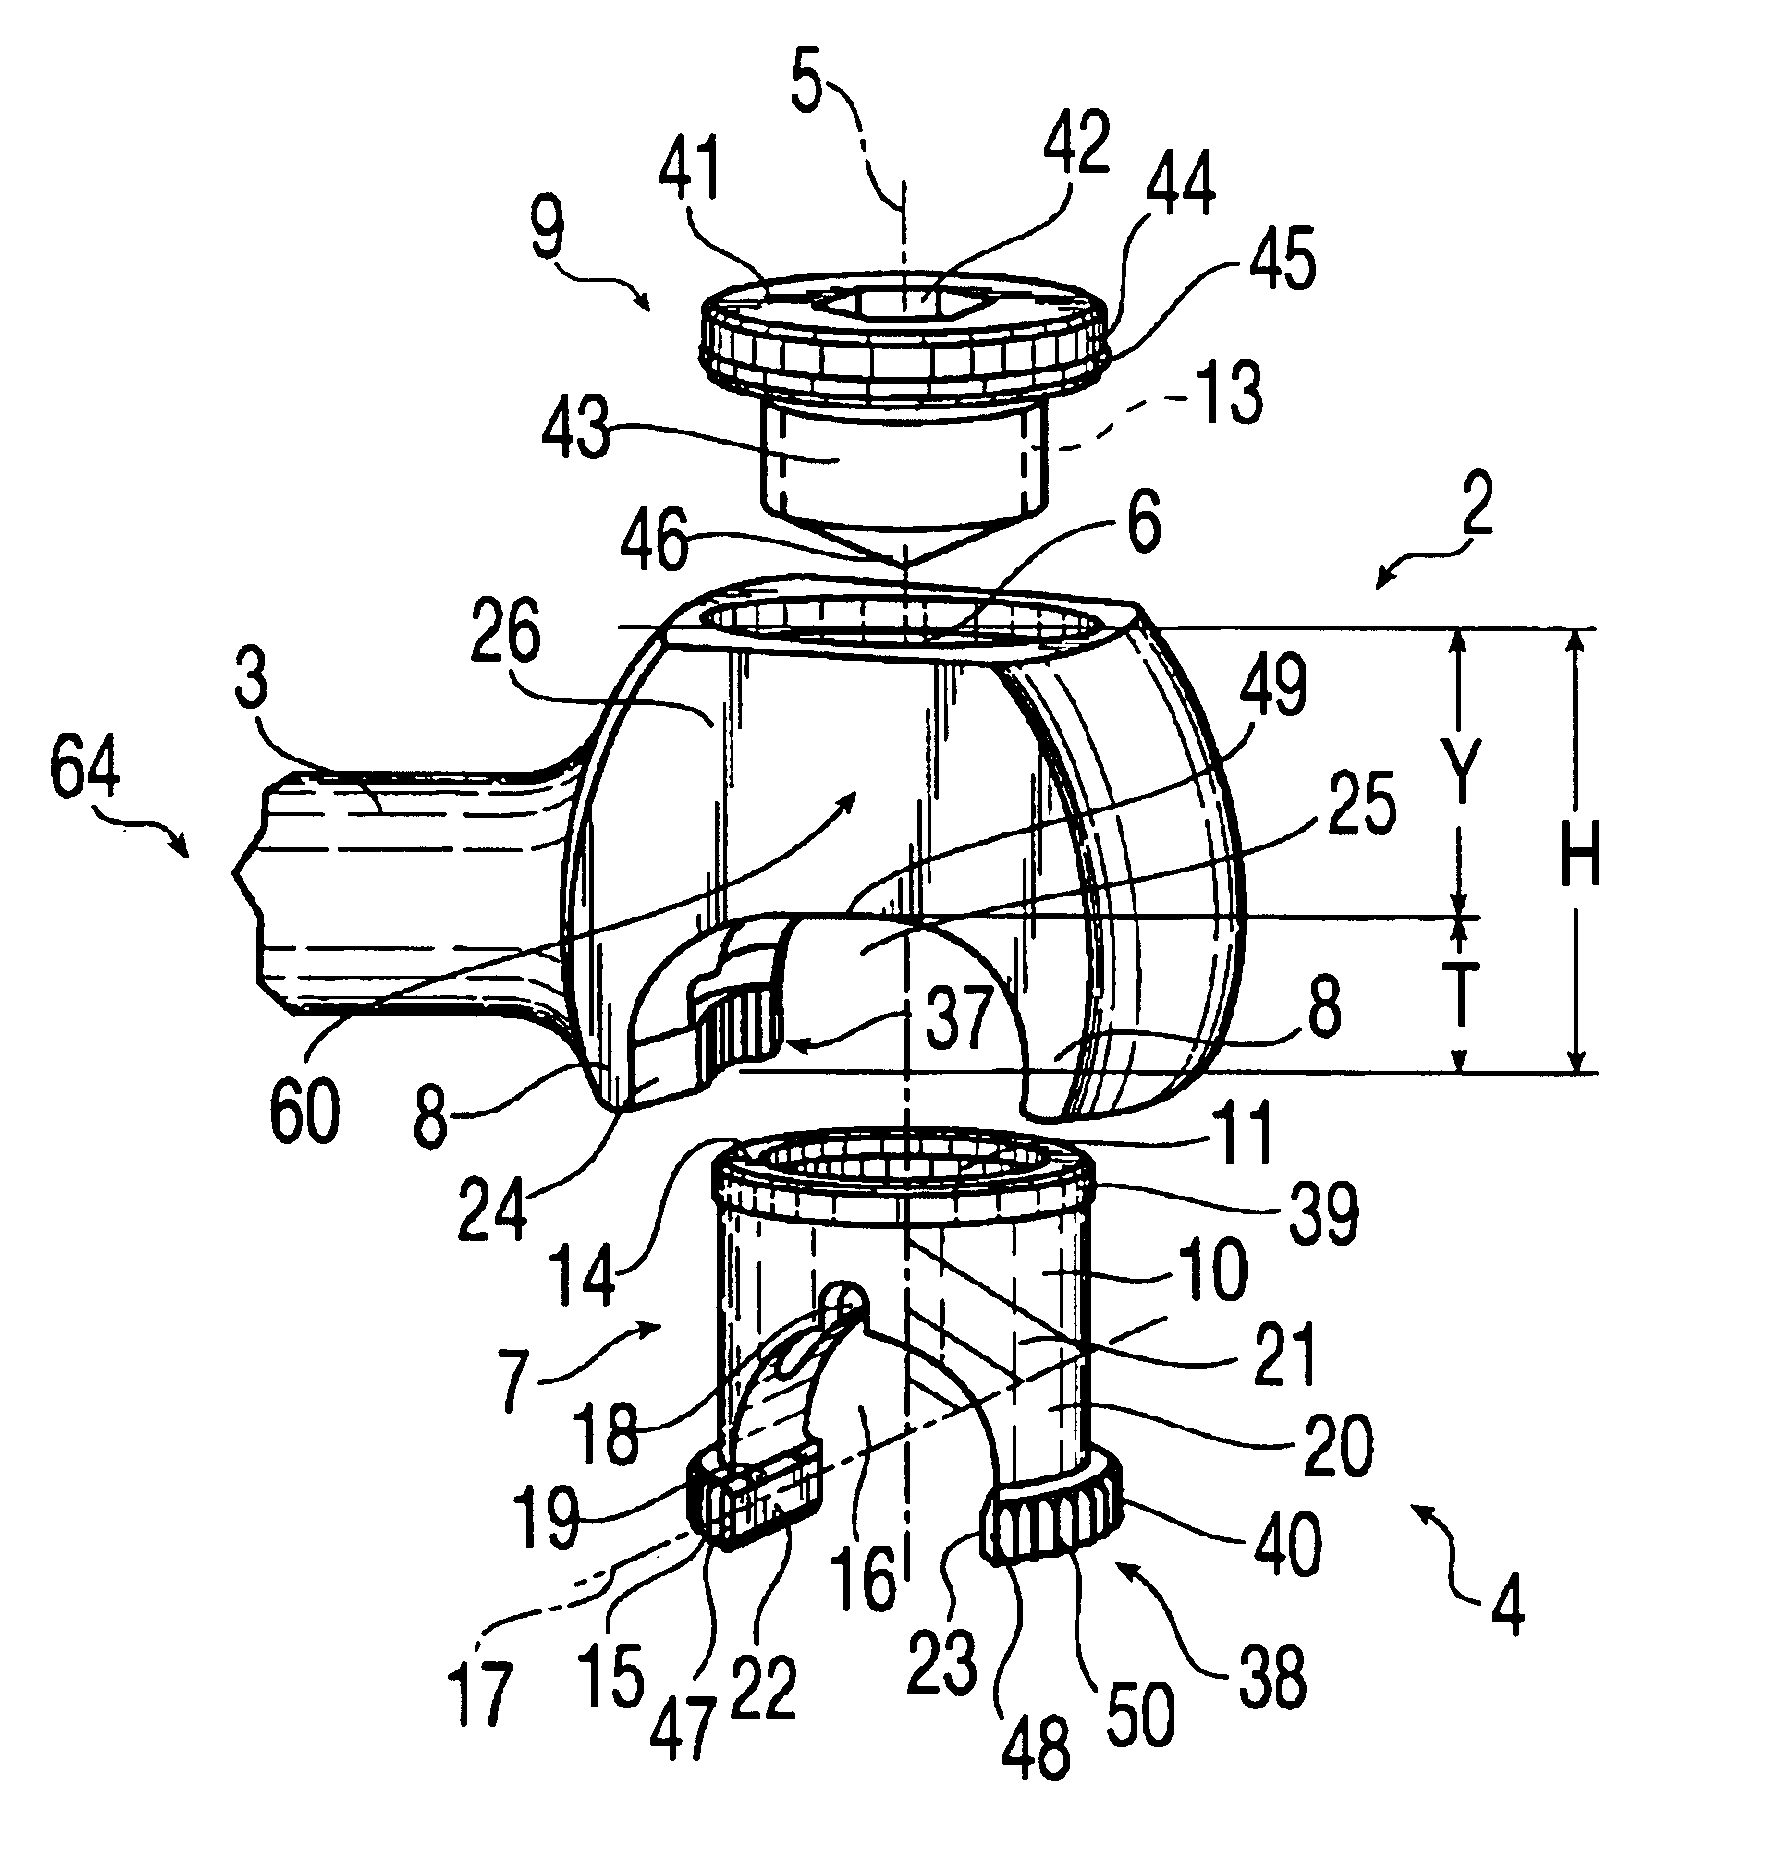 Device for releasably clamping a longitudinal member within a surgical implant